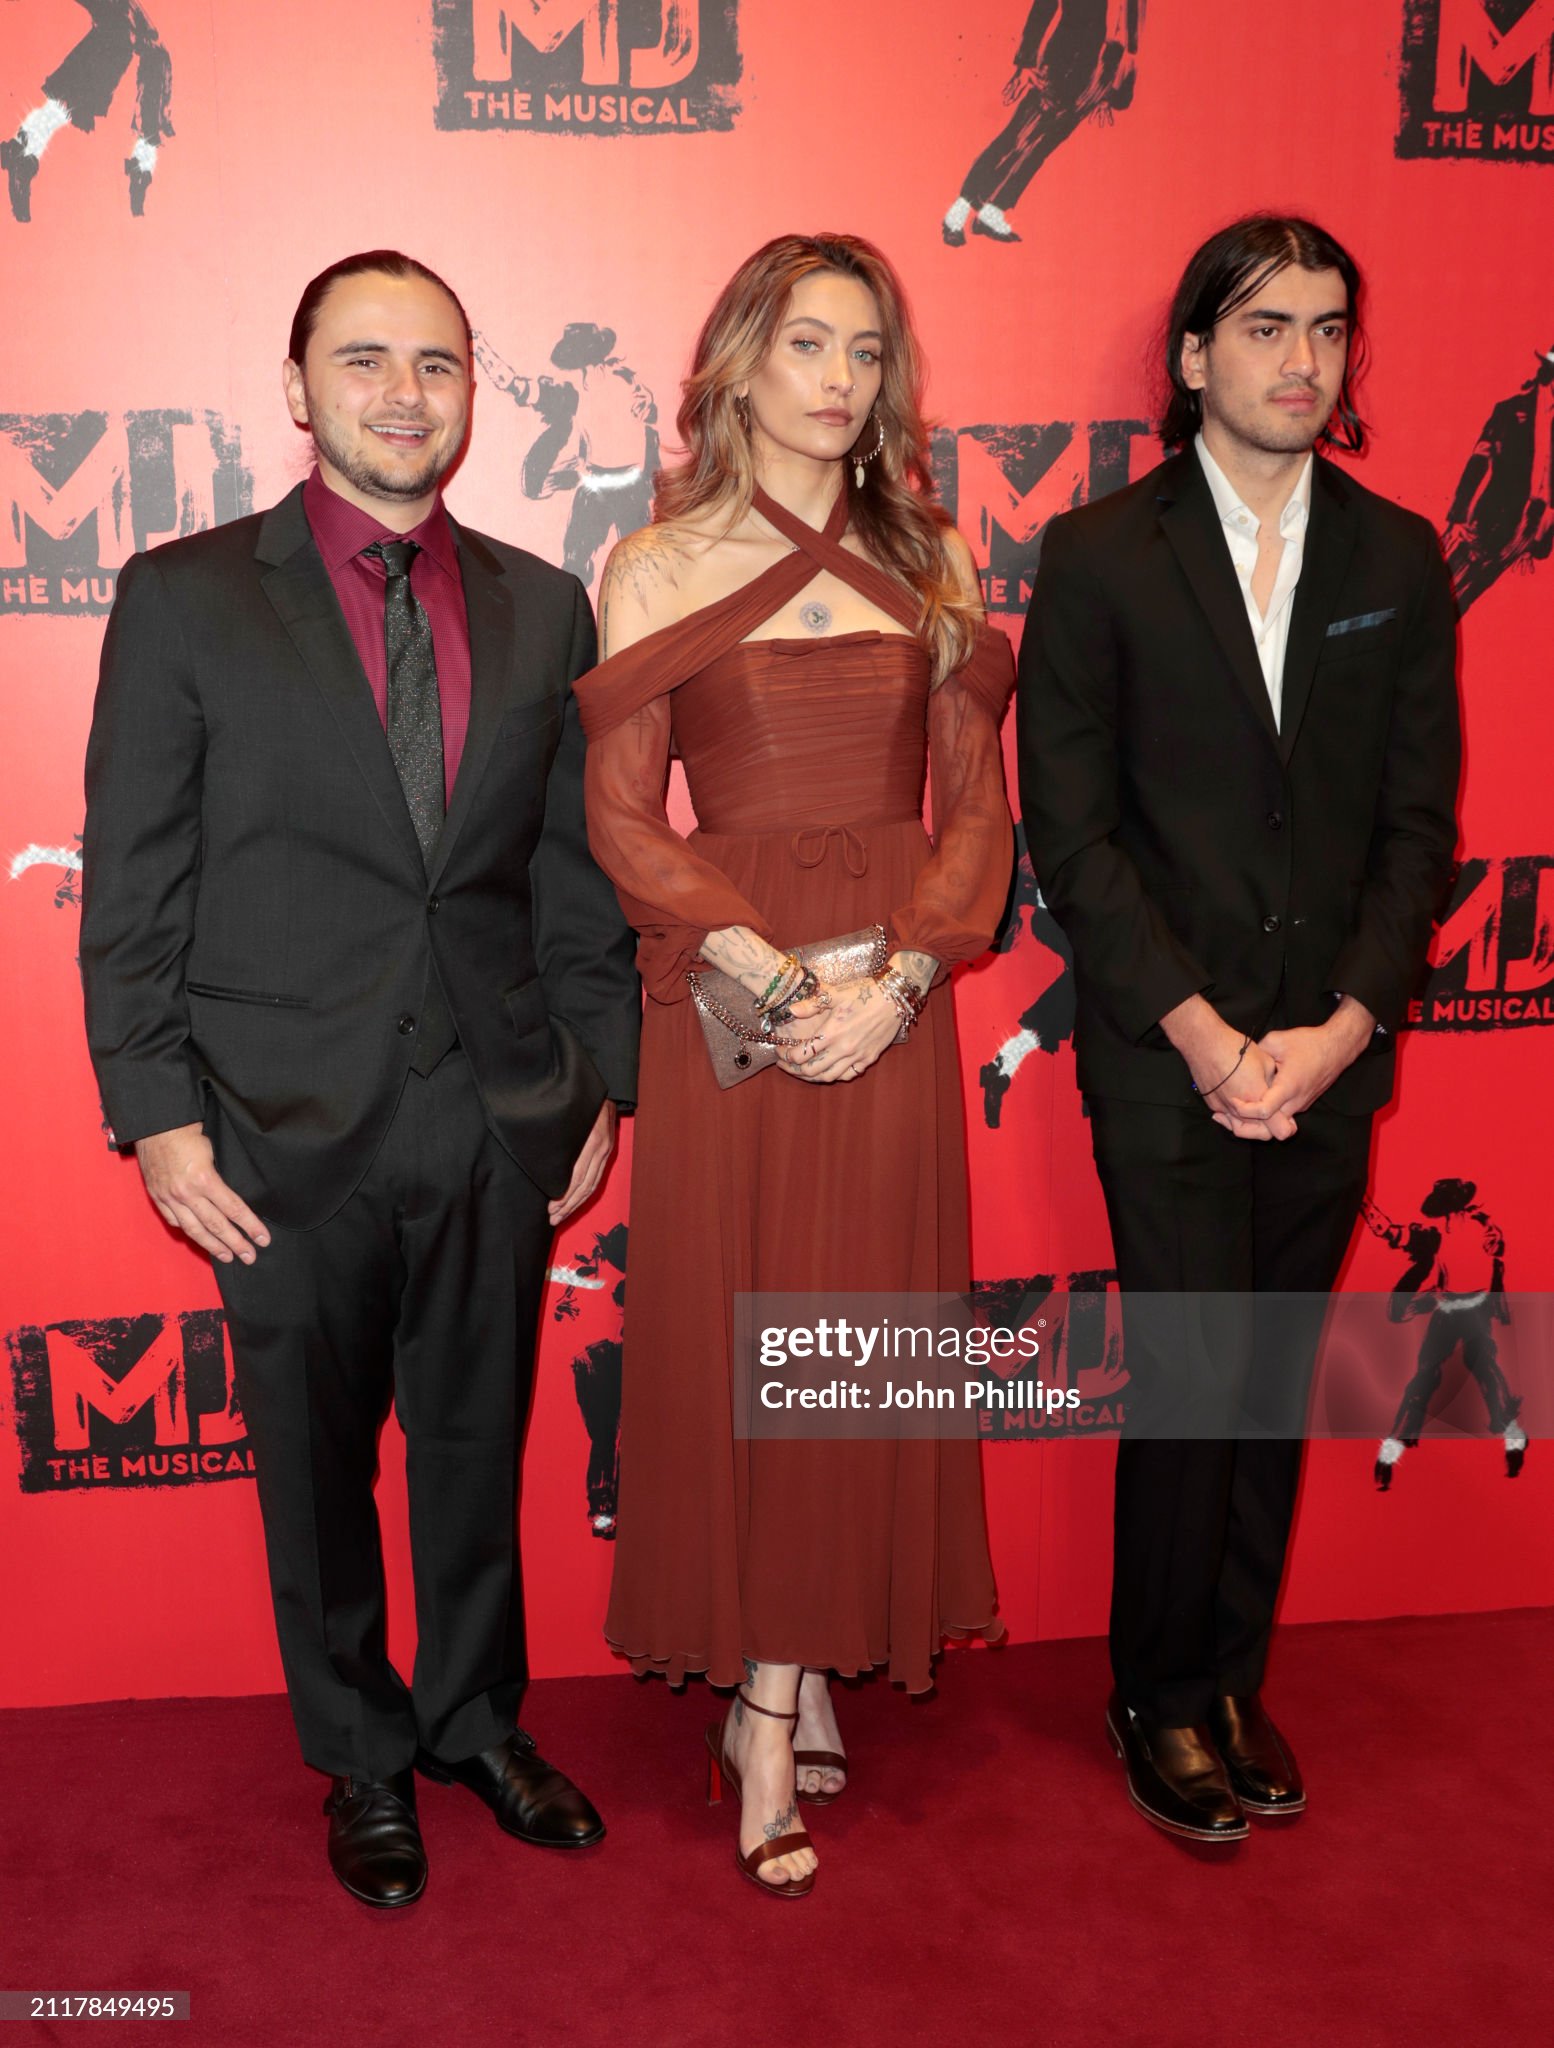 the-musical-opening-night-arrivals.jpg